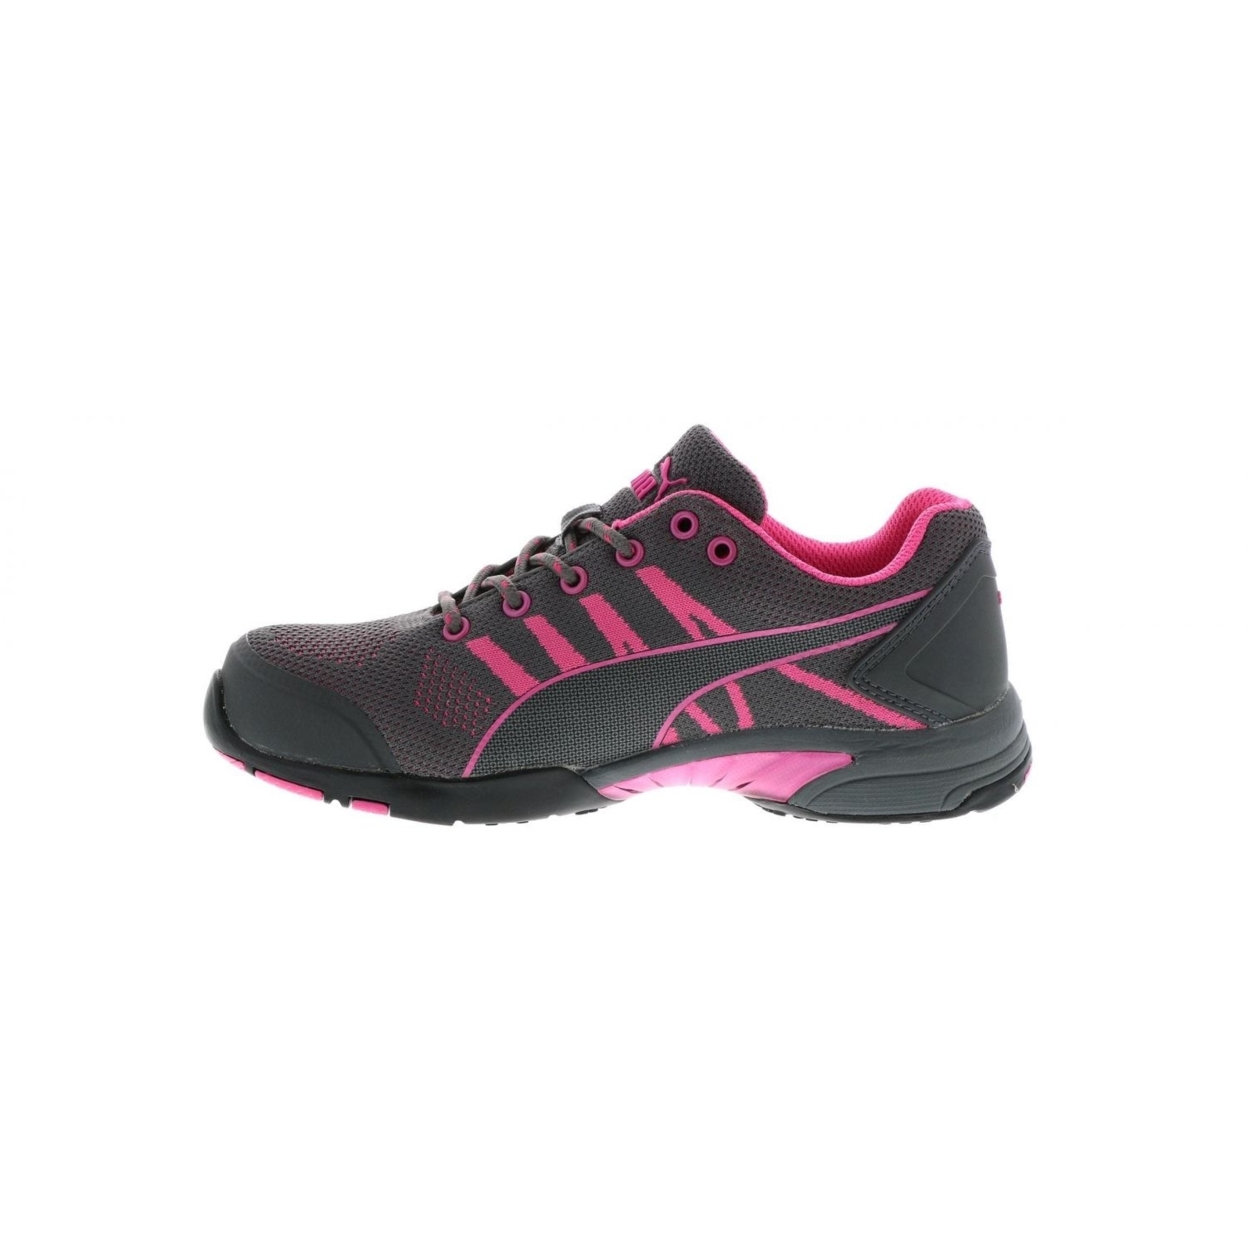 PUMA Safety Women's Celerity Knit Low Steel Toe ESD Work Shoe Pink - 642915 ONE SIZE PINK - PINK, 9.5